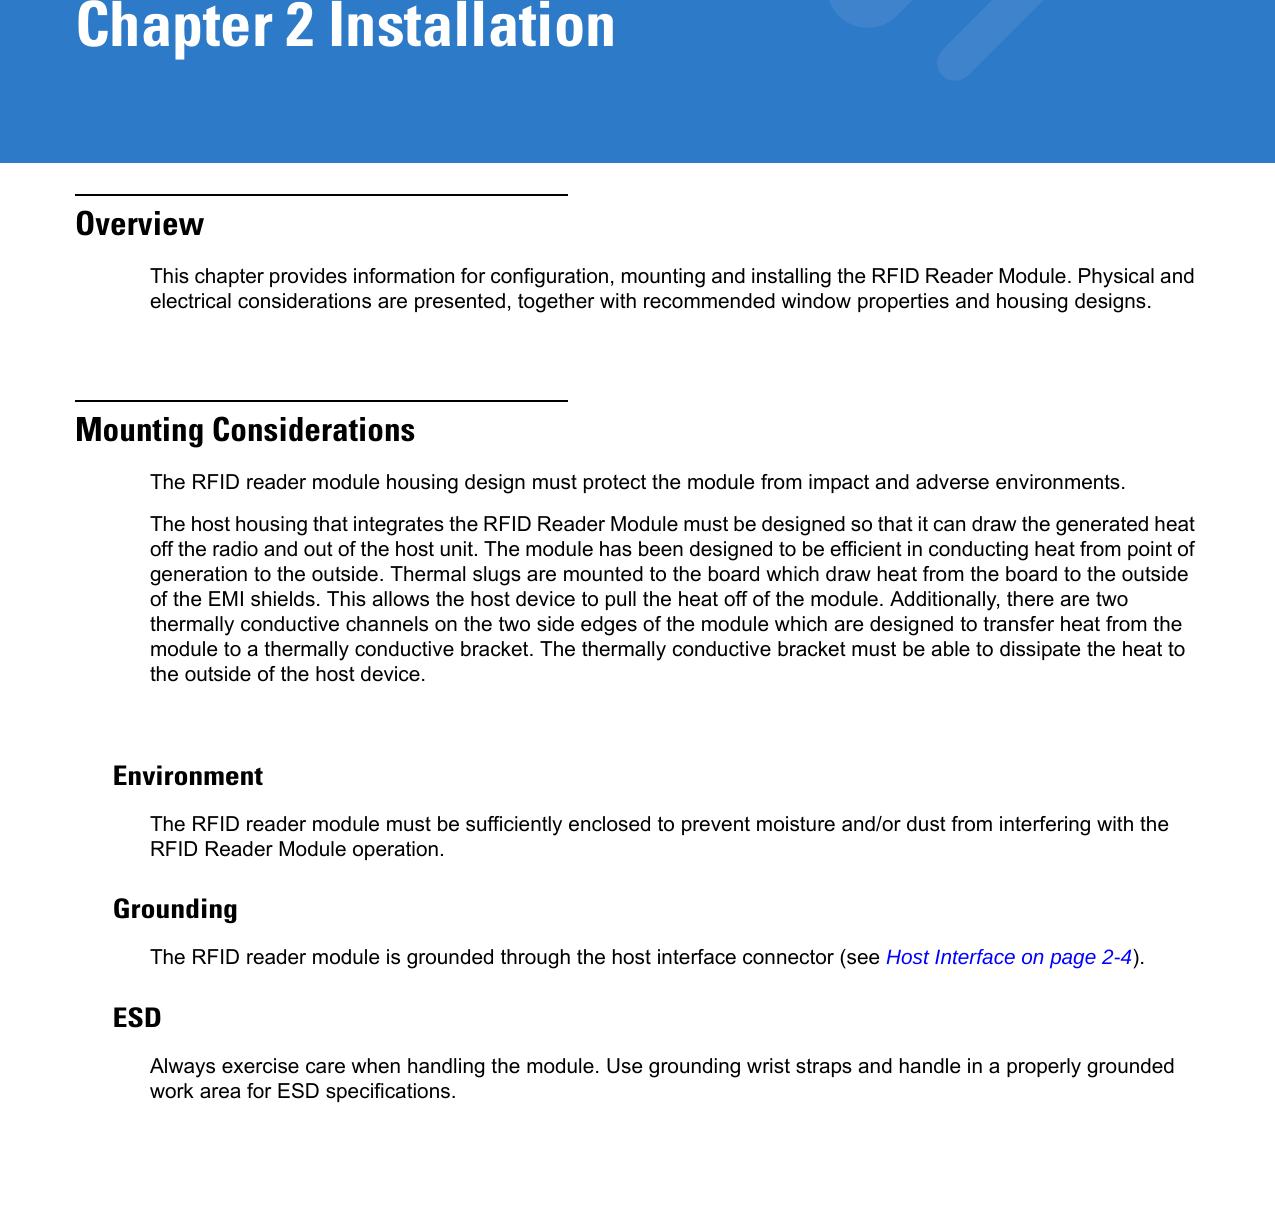 Chapter 2 InstallationOverviewThis chapter provides information for configuration, mounting and installing the RFID Reader Module. Physical and electrical considerations are presented, together with recommended window properties and housing designs.Mounting ConsiderationsThe RFID reader module housing design must protect the module from impact and adverse environments.The host housing that integrates the RFID Reader Module must be designed so that it can draw the generated heat off the radio and out of the host unit. The module has been designed to be efficient in conducting heat from point of generation to the outside. Thermal slugs are mounted to the board which draw heat from the board to the outside of the EMI shields. This allows the host device to pull the heat off of the module. Additionally, there are two thermally conductive channels on the two side edges of the module which are designed to transfer heat from the module to a thermally conductive bracket. The thermally conductive bracket must be able to dissipate the heat to the outside of the host device. EnvironmentThe RFID reader module must be sufficiently enclosed to prevent moisture and/or dust from interfering with the RFID Reader Module operation.GroundingThe RFID reader module is grounded through the host interface connector (see Host Interface on page 2-4).ESDAlways exercise care when handling the module. Use grounding wrist straps and handle in a properly grounded work area for ESD specifications.